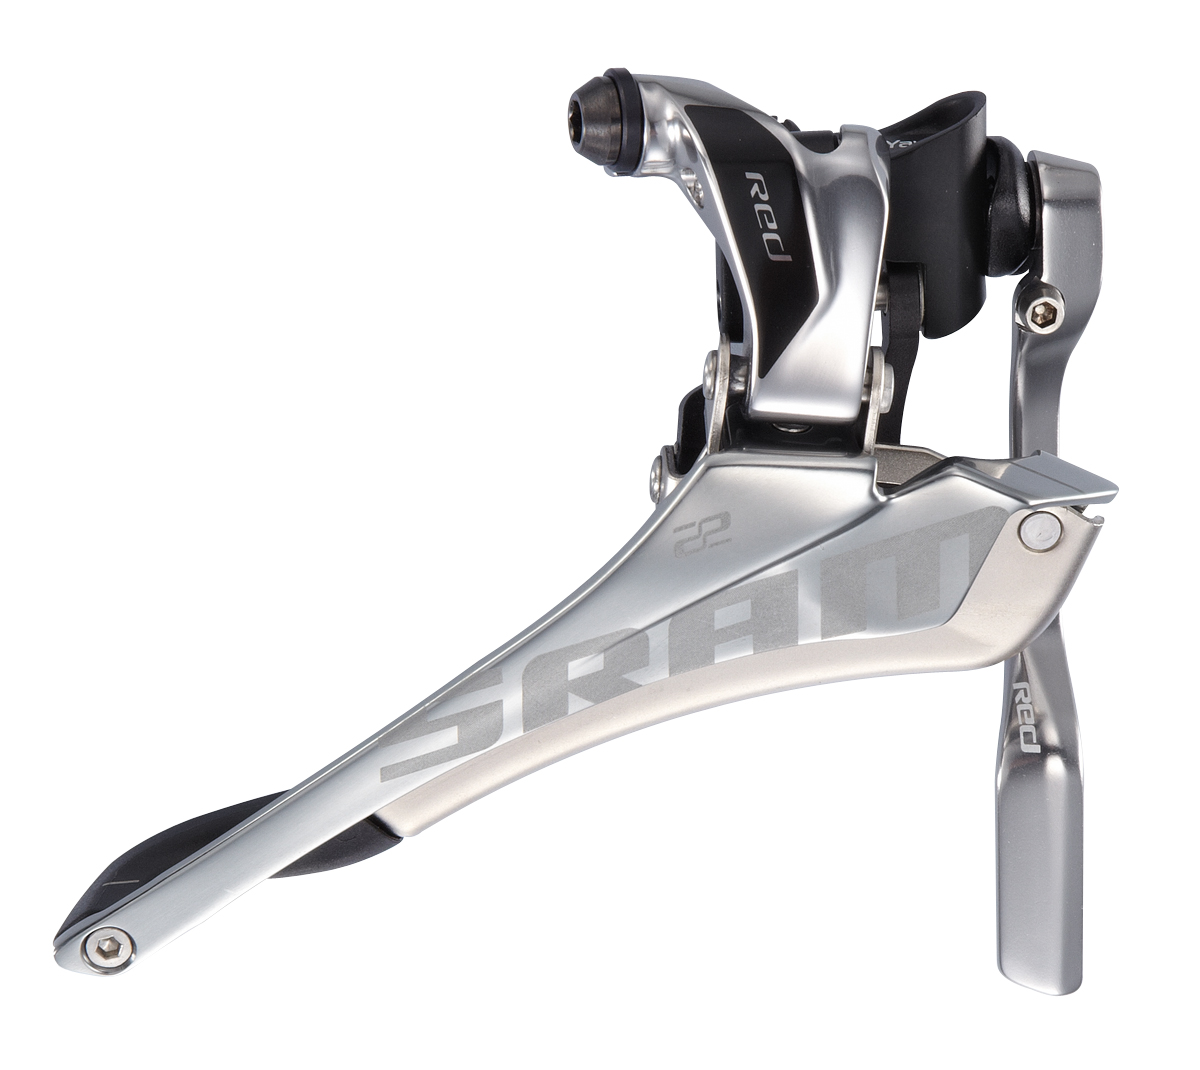 SRAM Red 22 Front Derailleur Bronze with Chain Spotter C2 V4.3 by SRAM 通販 